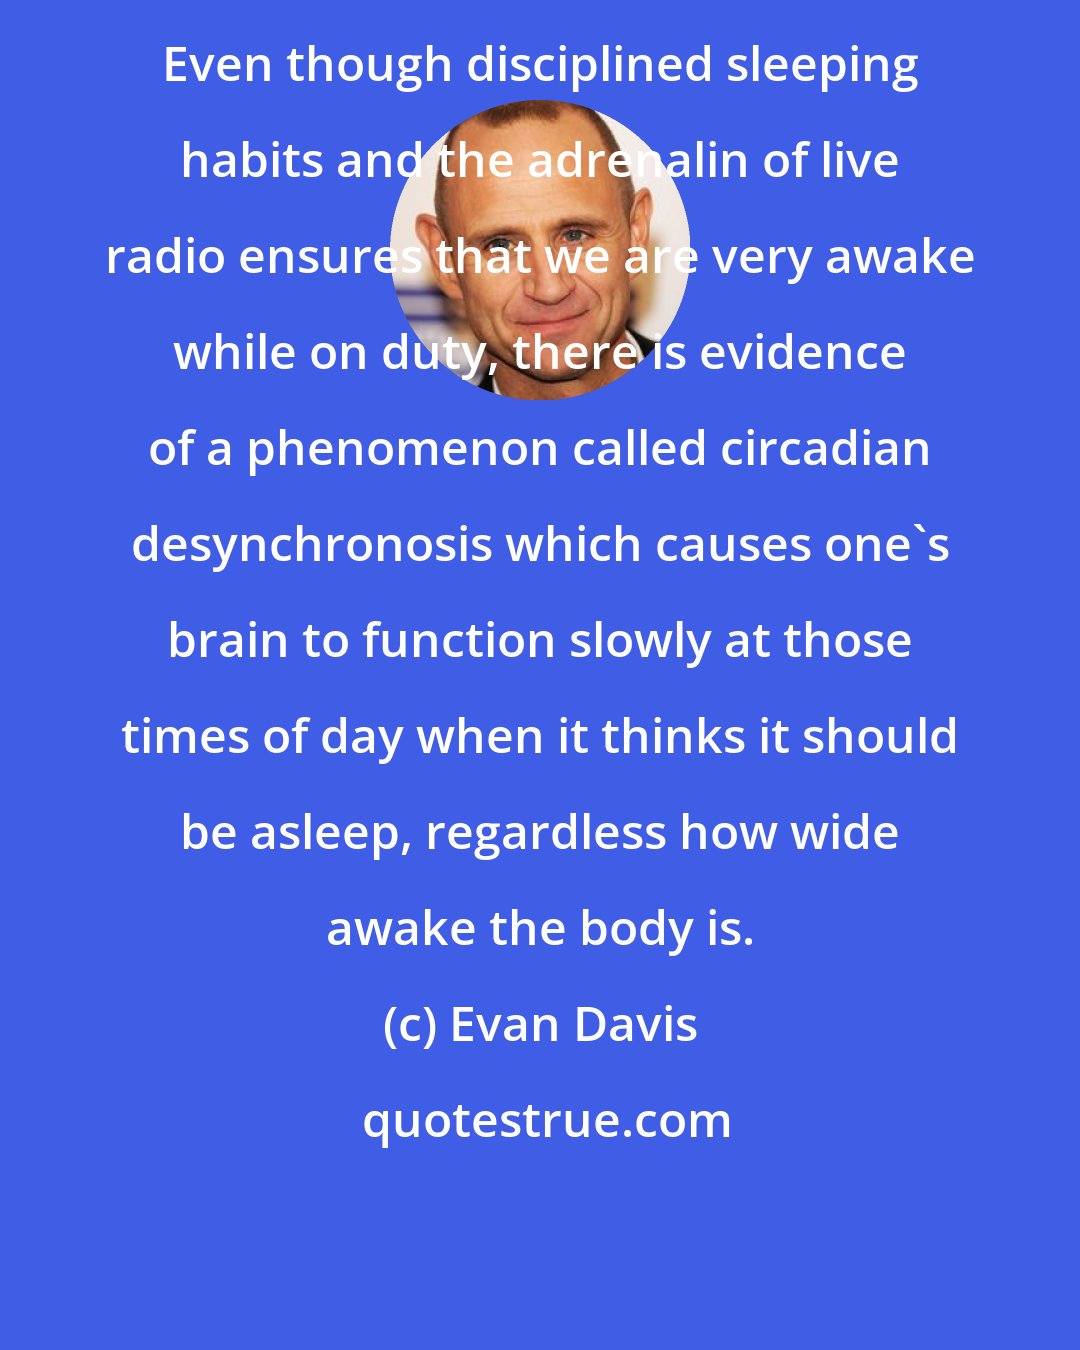 Evan Davis: Even though disciplined sleeping habits and the adrenalin of live radio ensures that we are very awake while on duty, there is evidence of a phenomenon called circadian desynchronosis which causes one's brain to function slowly at those times of day when it thinks it should be asleep, regardless how wide awake the body is.